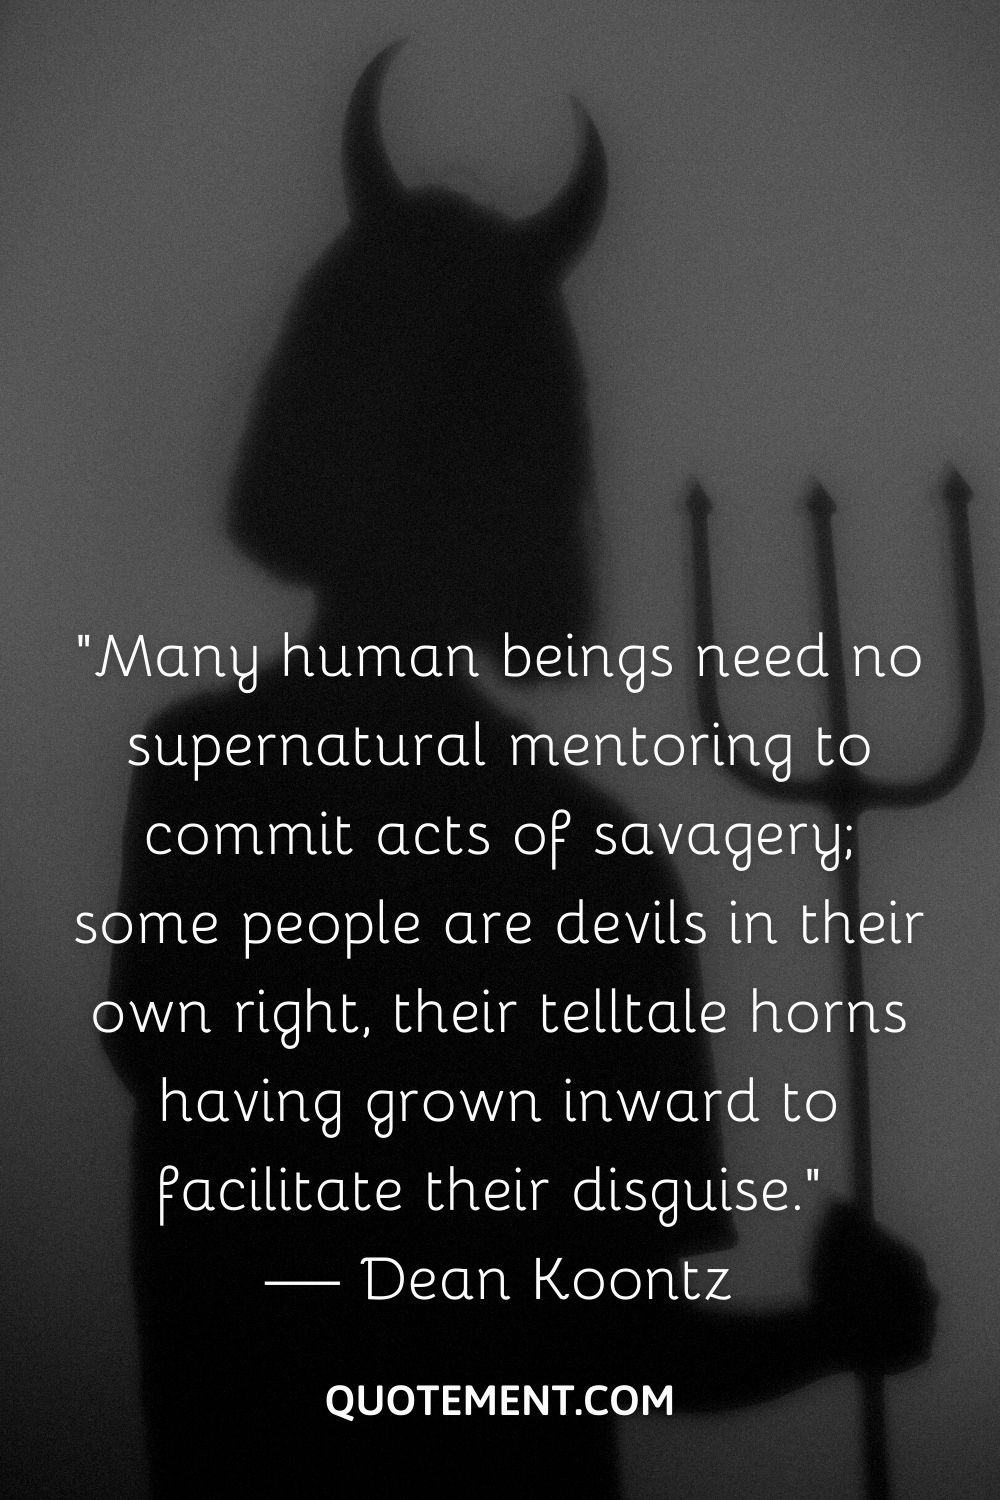 “Many human beings need no supernatural mentoring to commit acts of savagery; some people